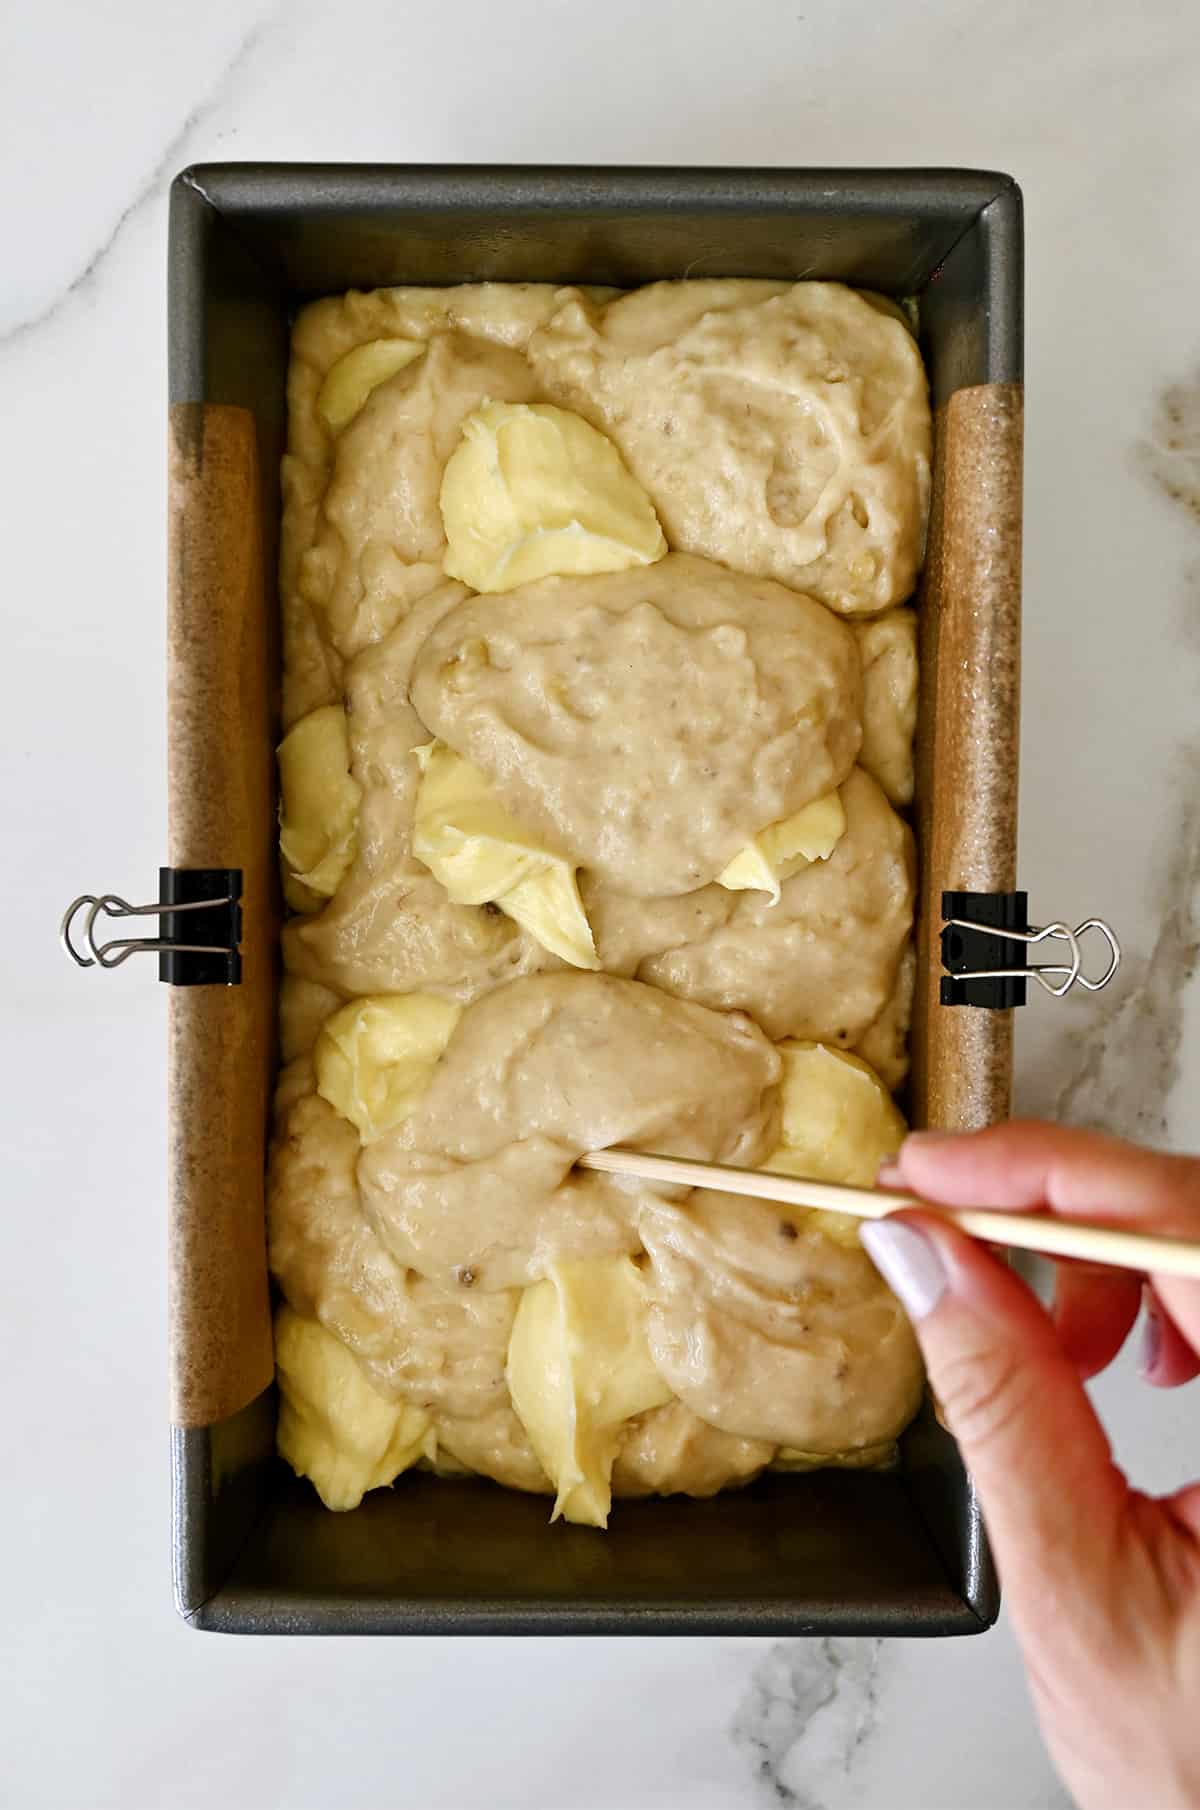 A hand holding a wooden skewer swirls cream cheese together with banana bread batter in a parchment paper-lined loaf pan.